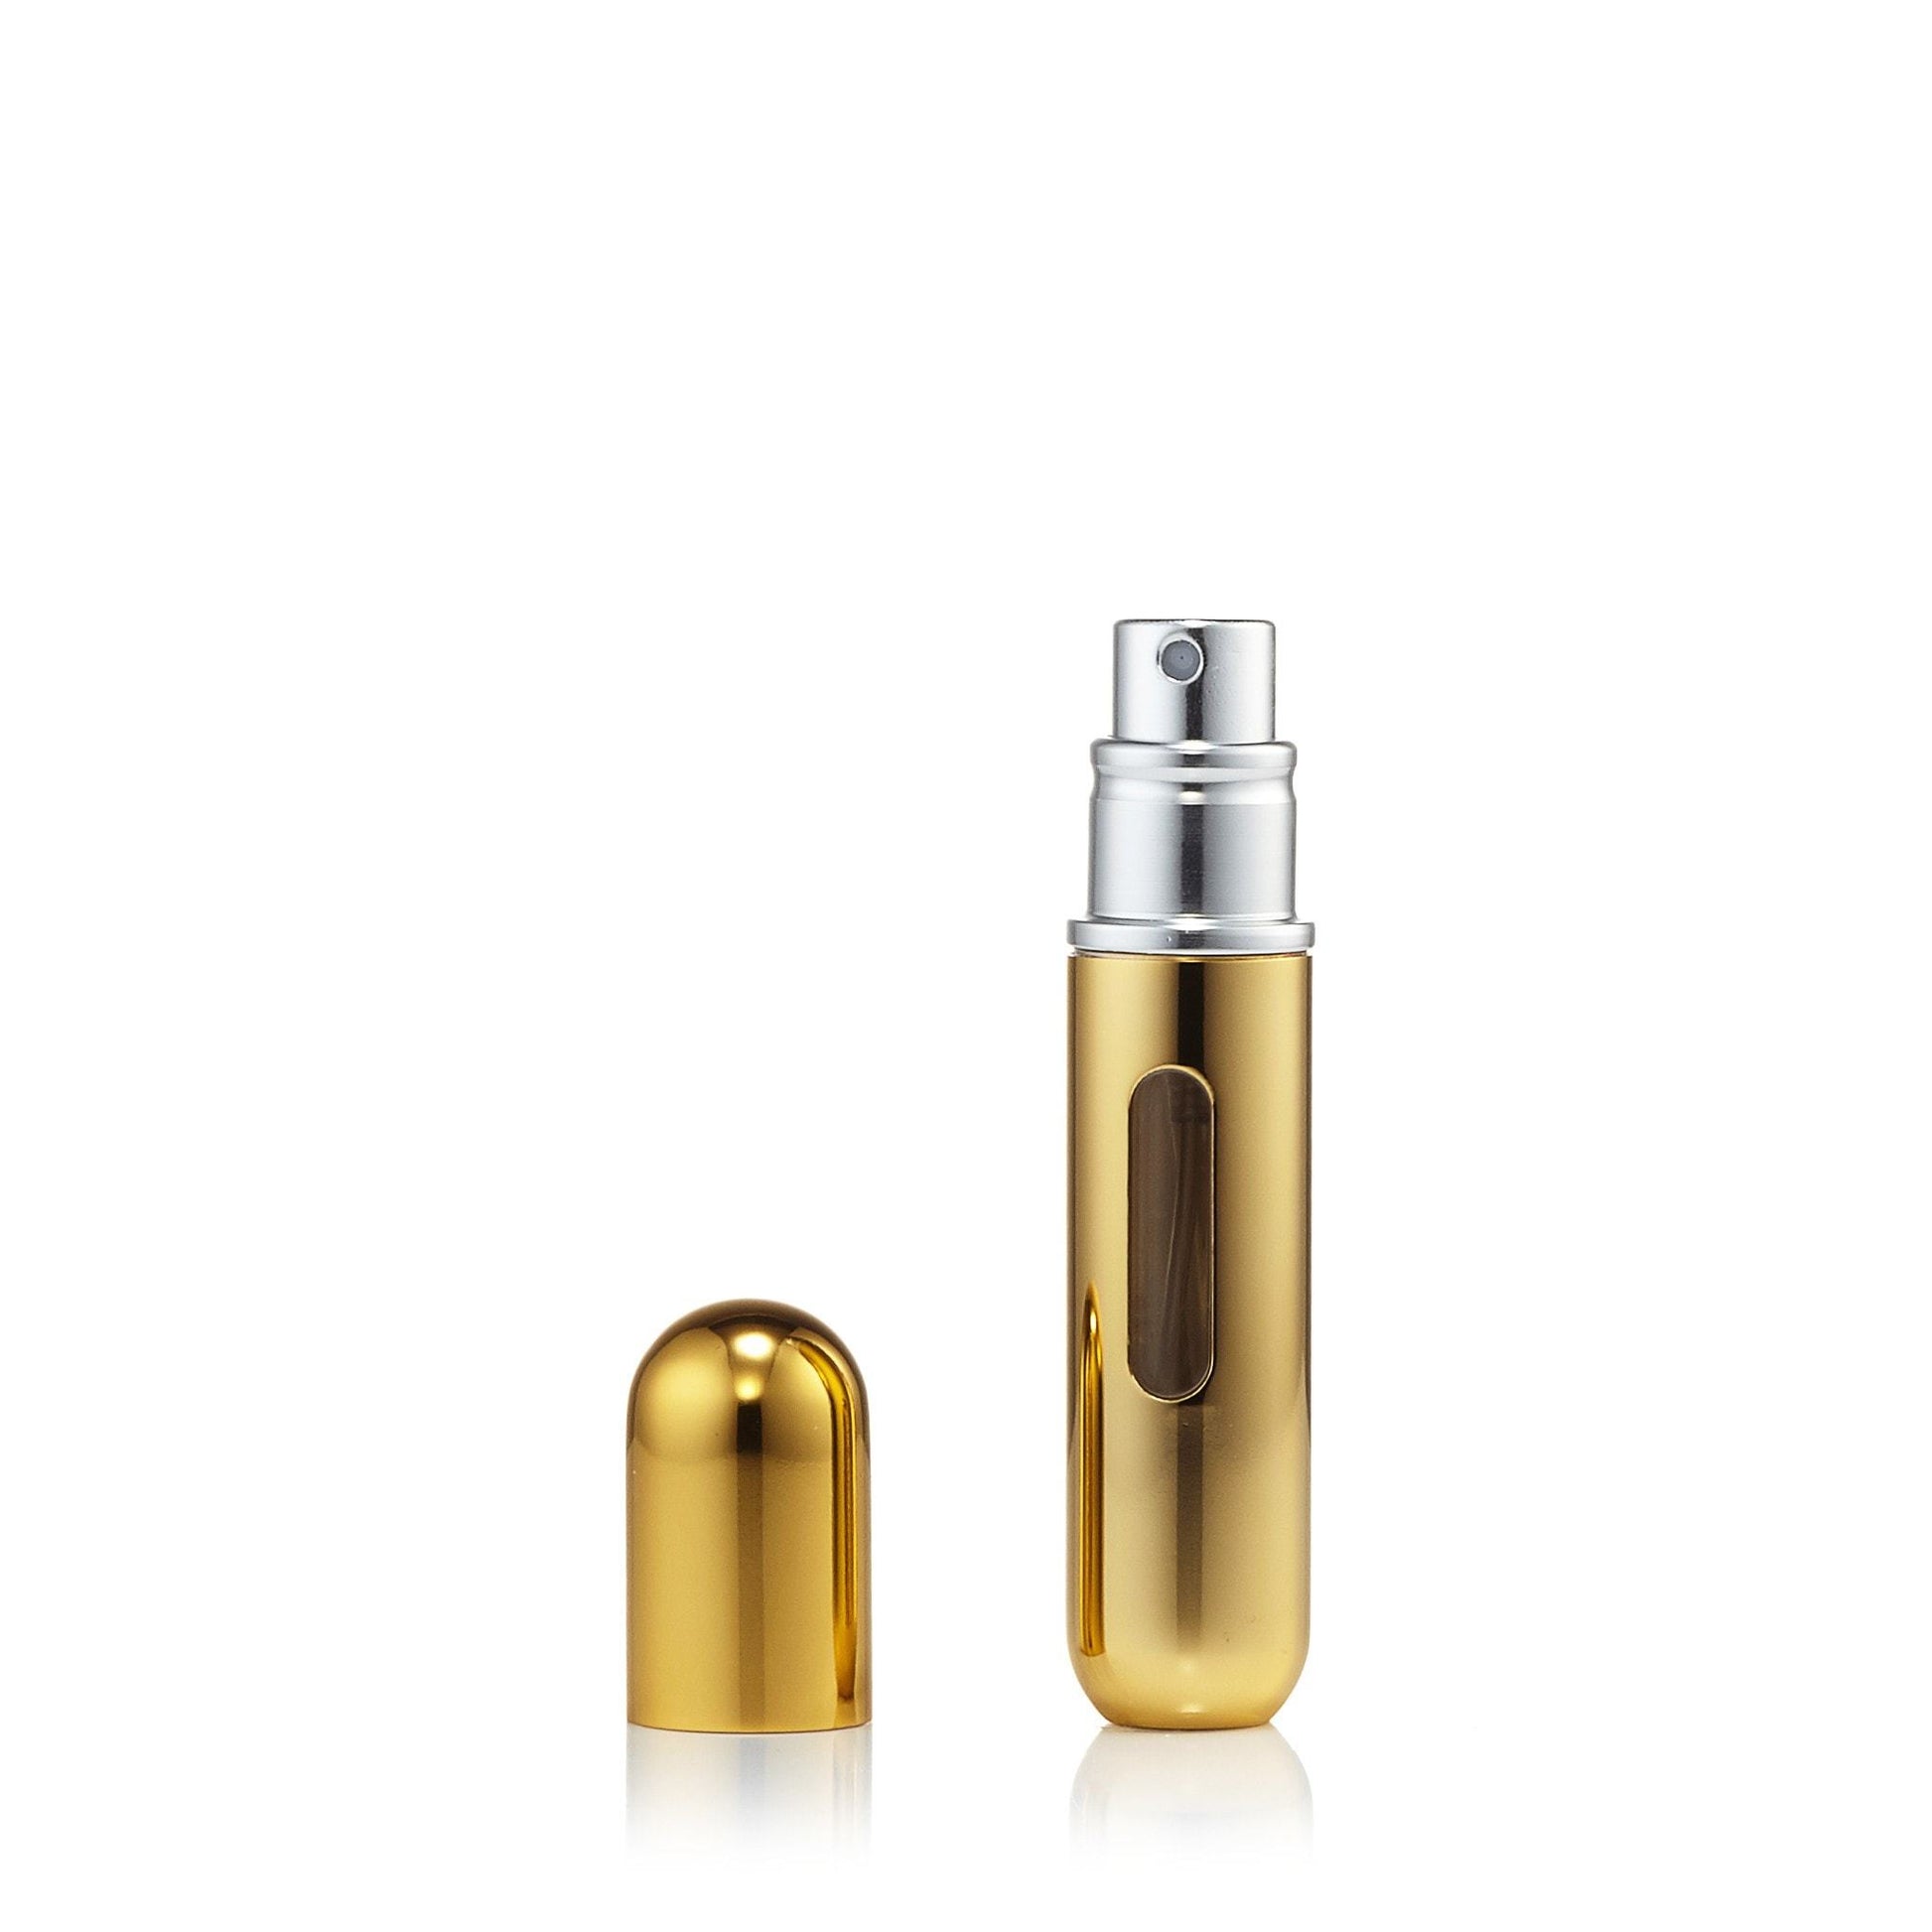 Pump and Fill Fragrance Atomizer by Flo, Product image 2